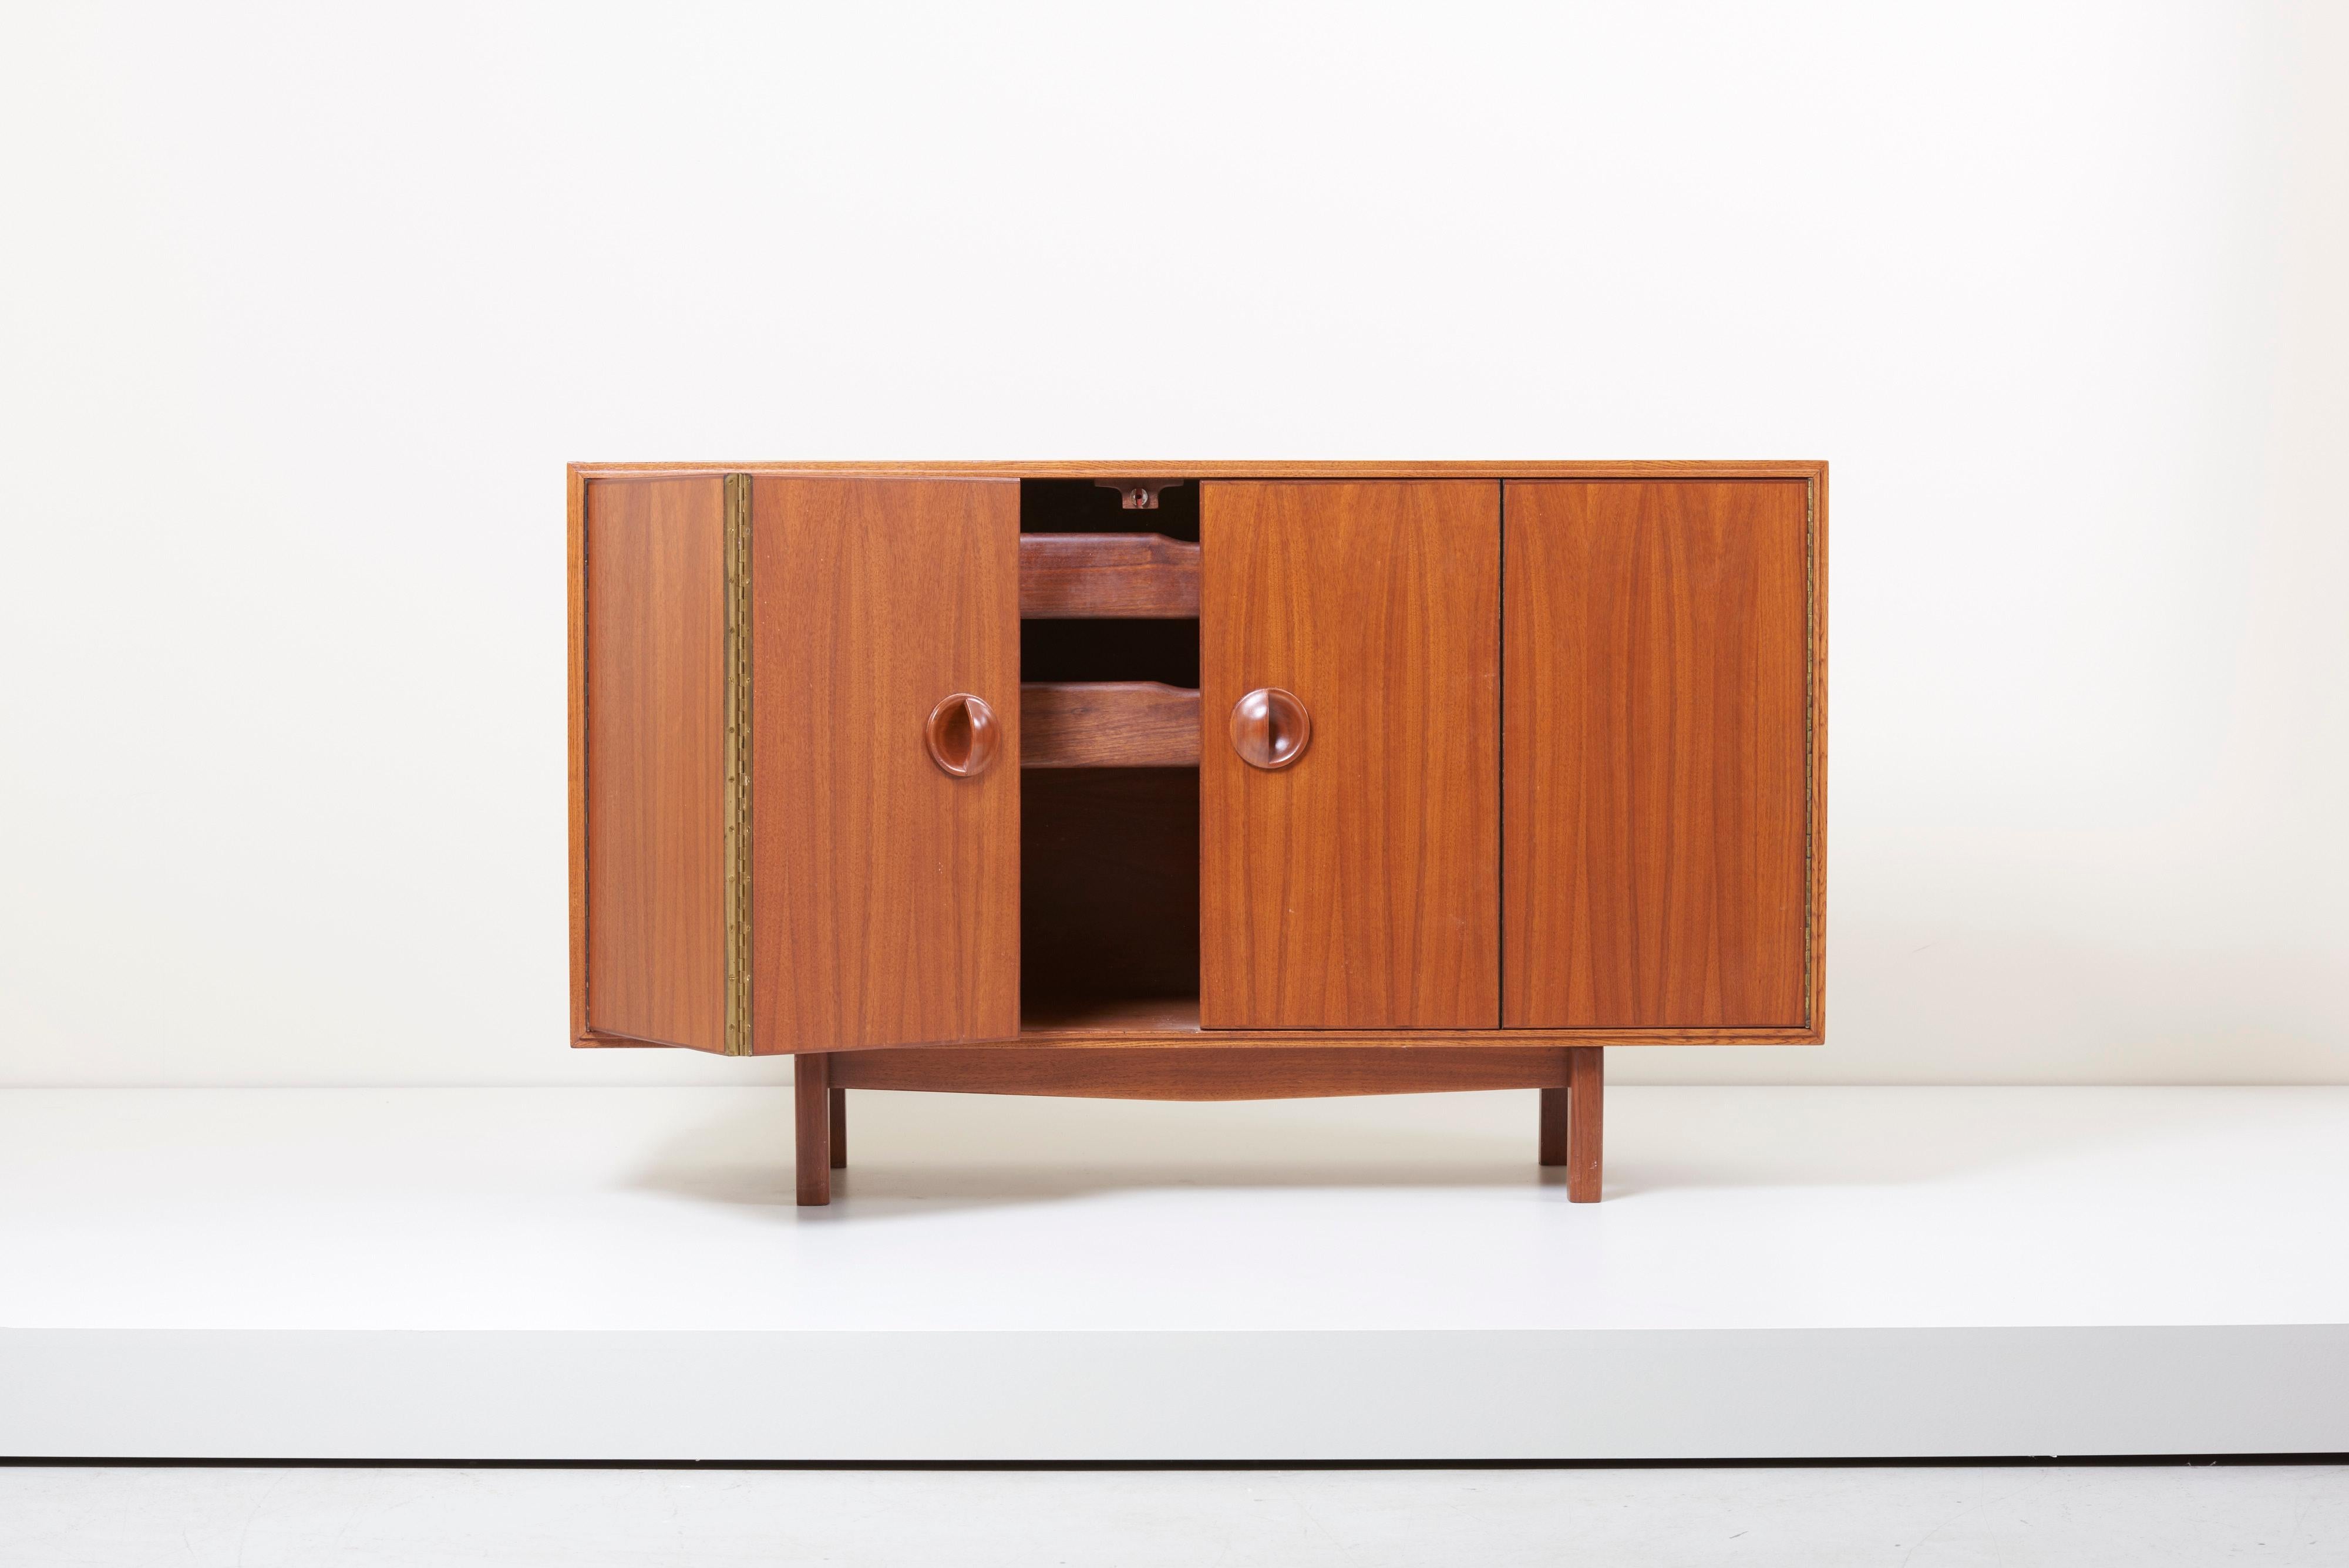 American Craftsman One of a Kind Studio Sideboard or Cabinet by John Kapel Studio, US, 1960s For Sale